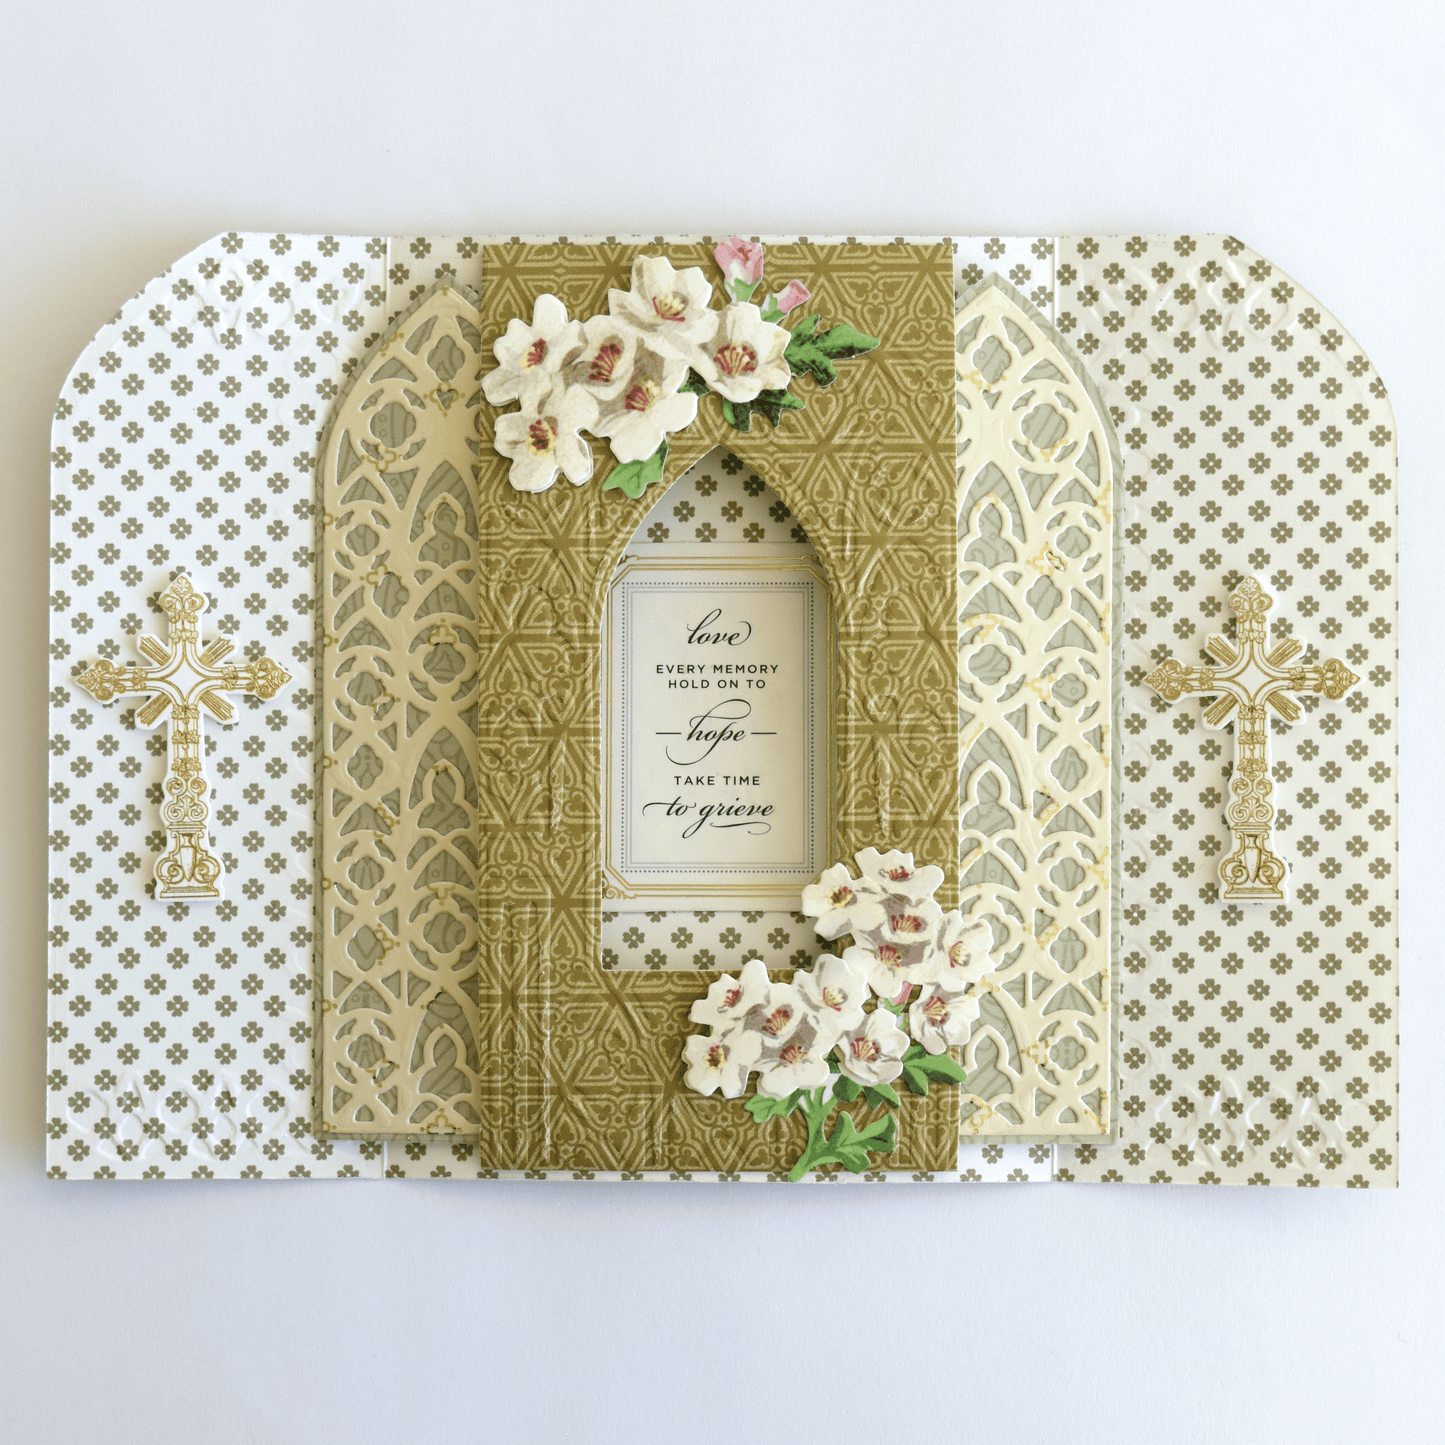 a card with flowers and a cross on it.